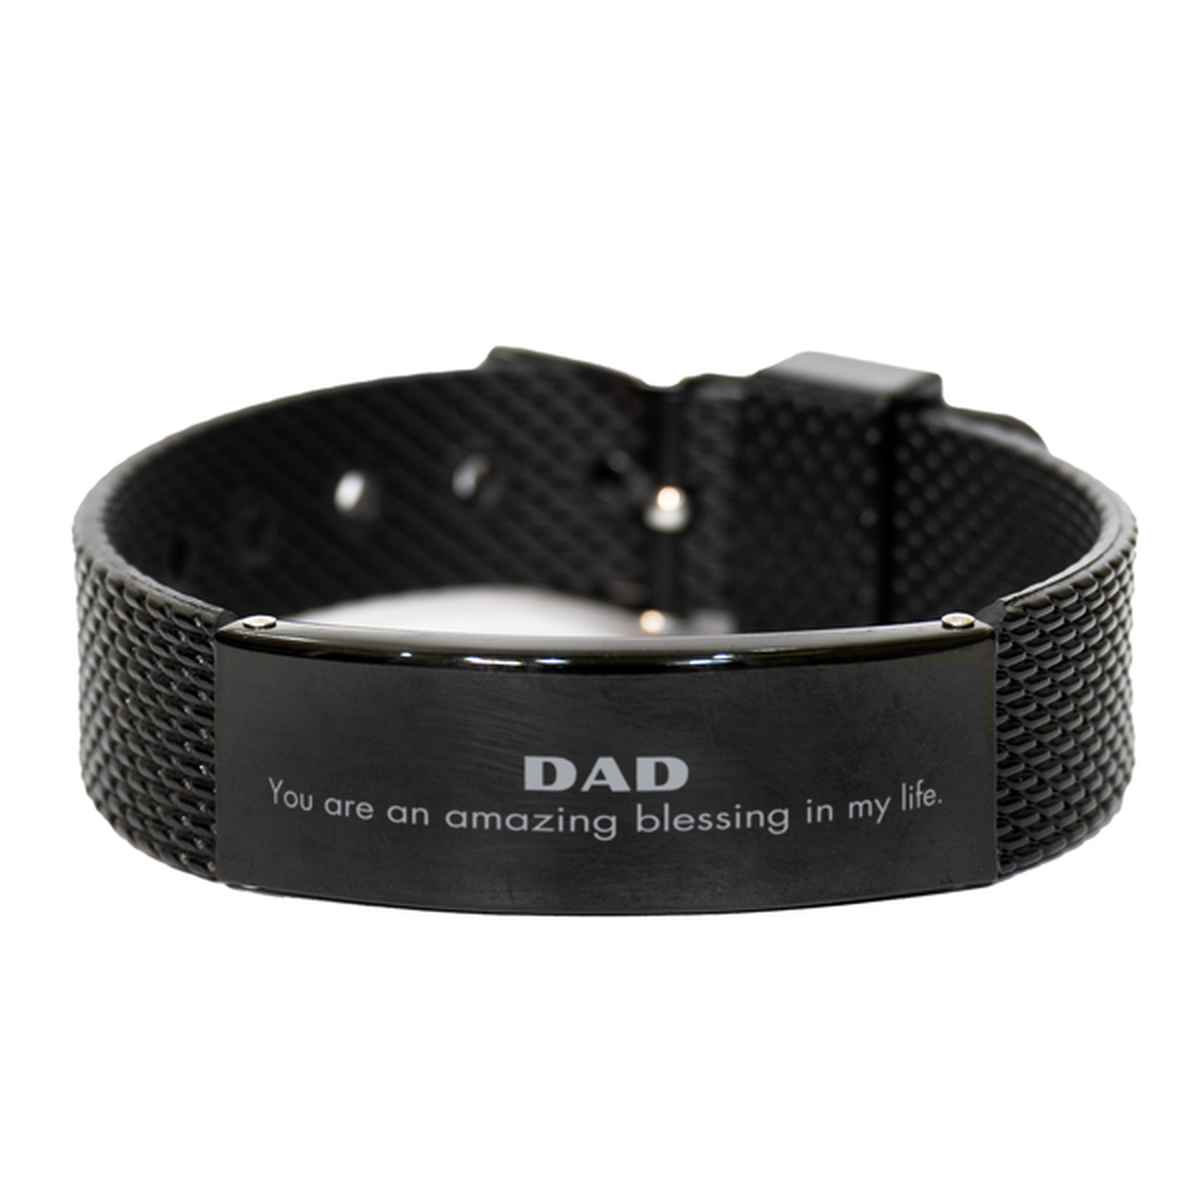 Dad Black Shark Mesh Bracelet, You are an amazing blessing in my life, Thank You Gifts For Dad, Inspirational Birthday Christmas Unique Gifts For Dad